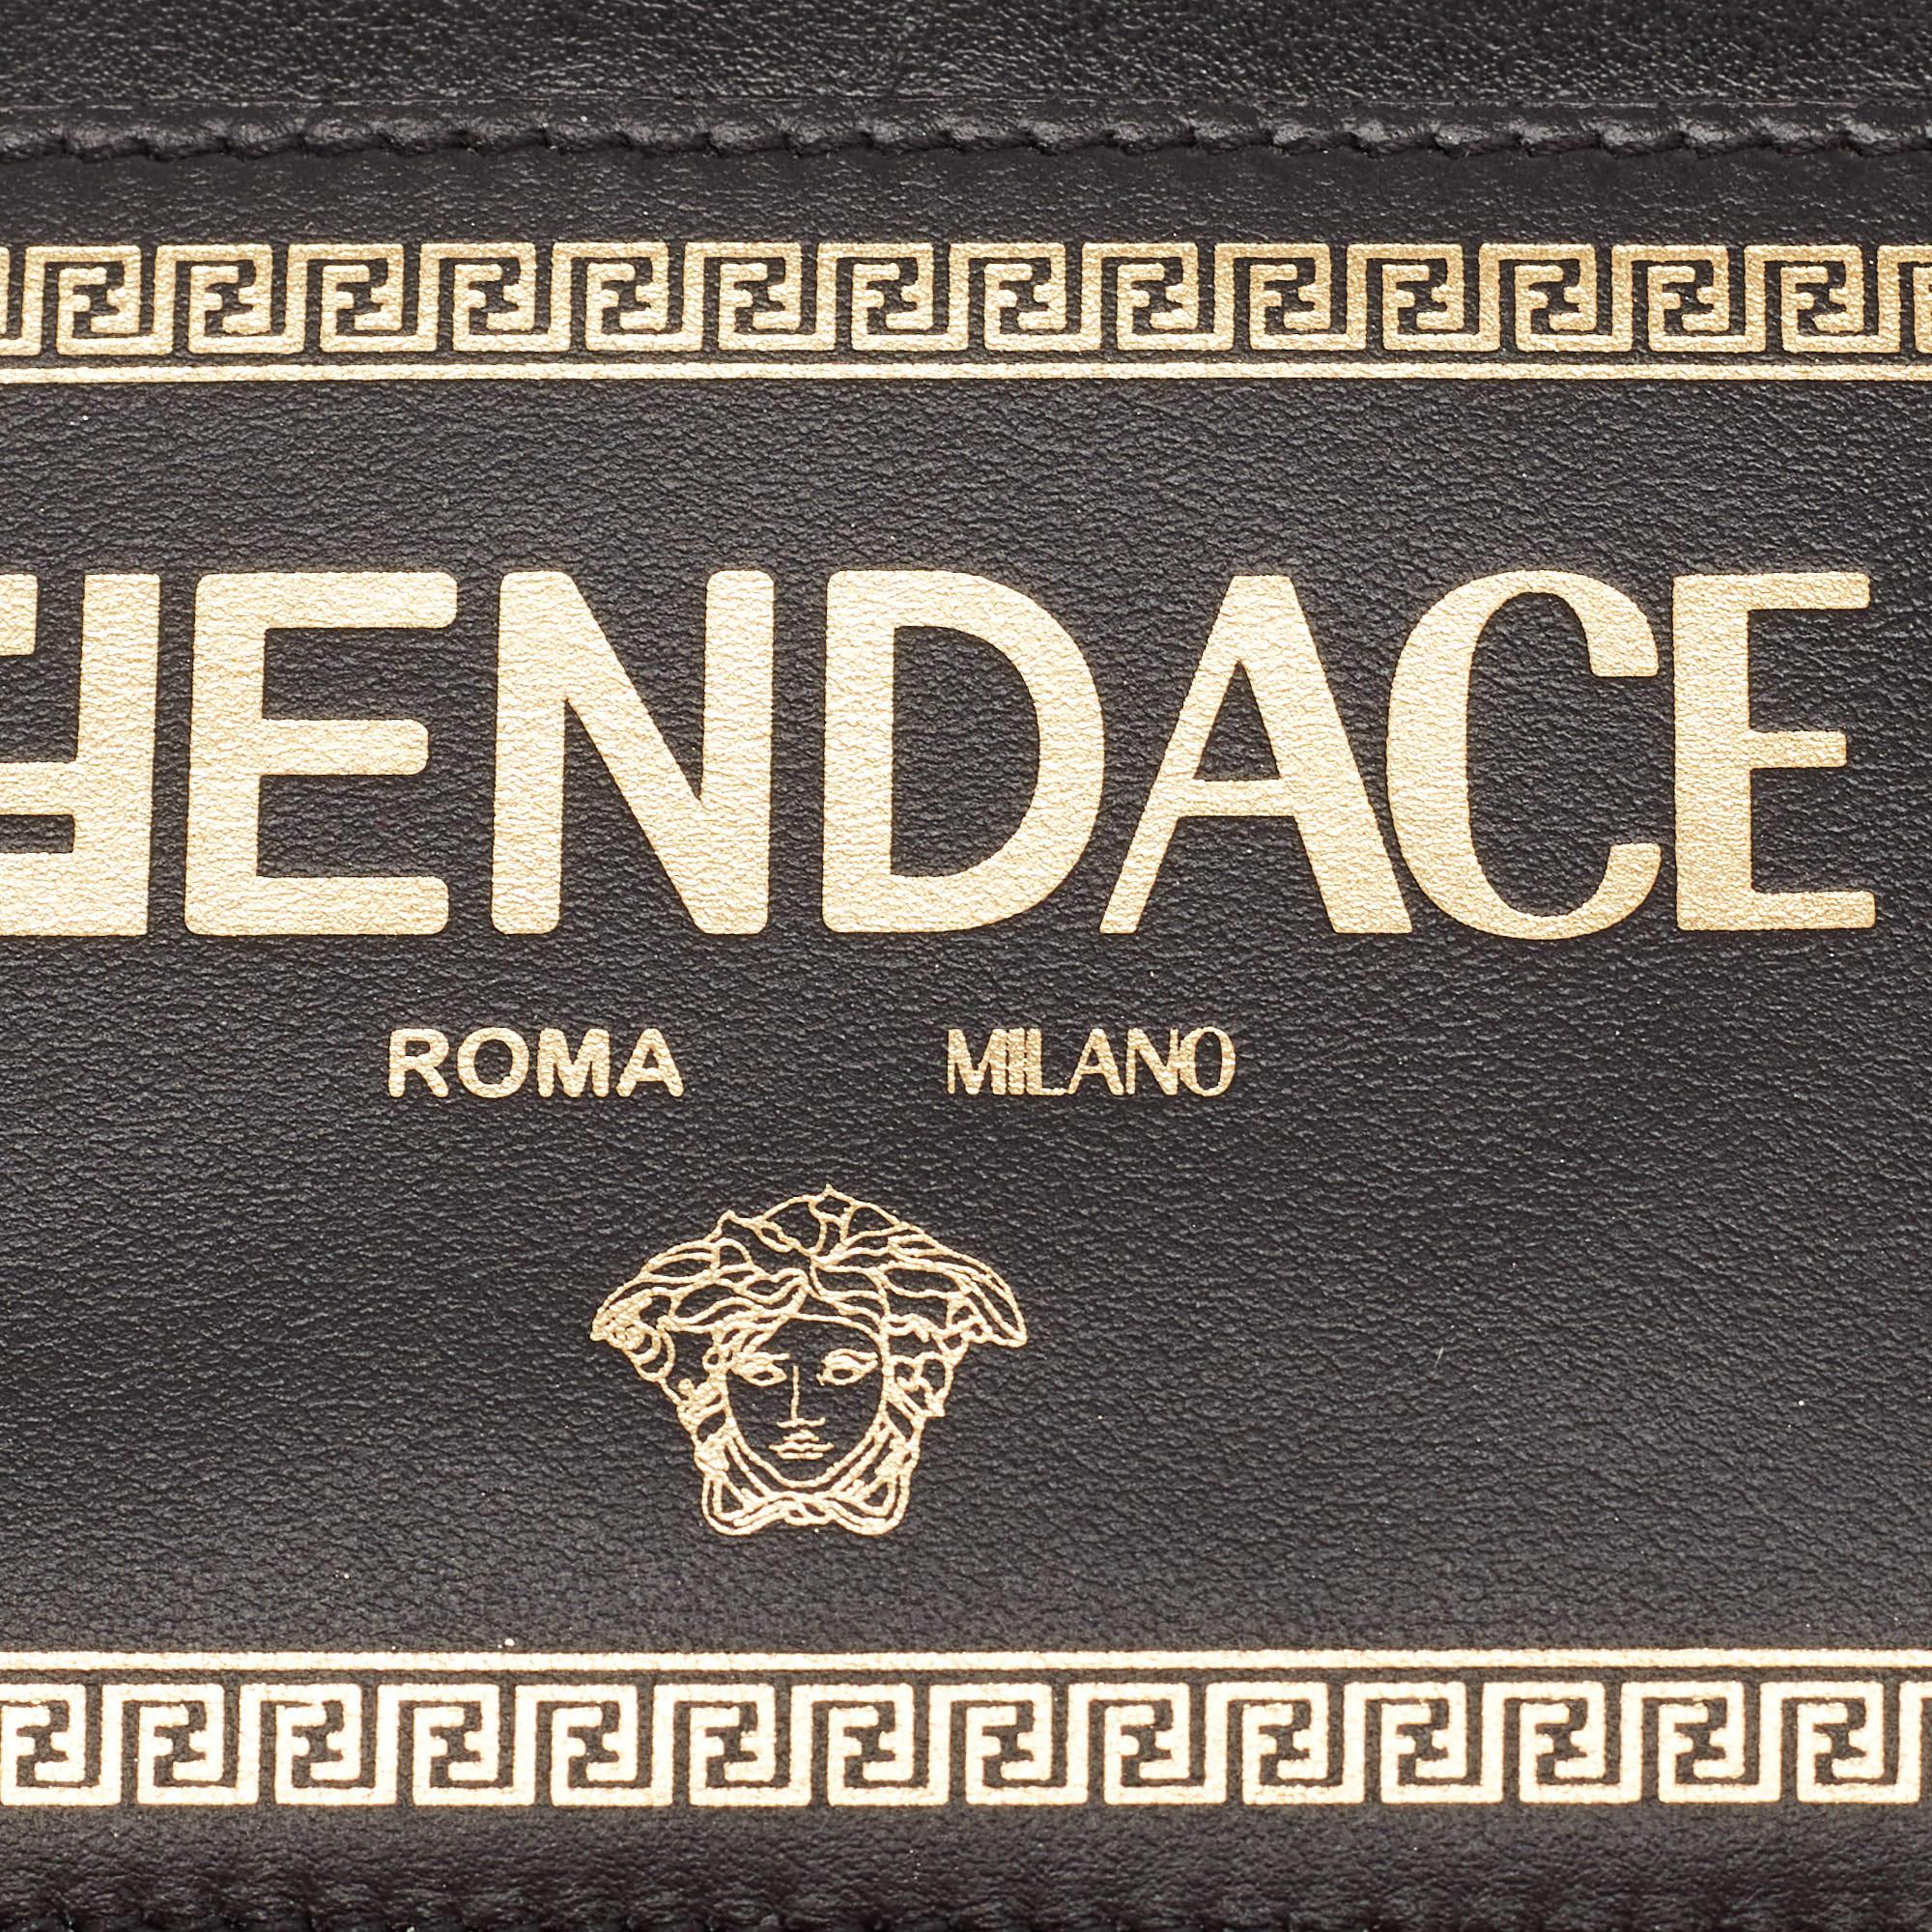 The Fendi x Versace Fendace card holder is a luxurious accessory featuring a sleek black leather exterior adorned with gold accents. The iconic Fendace logo adds a touch of opulence, while the lanyard provides practicality for holding cards. This